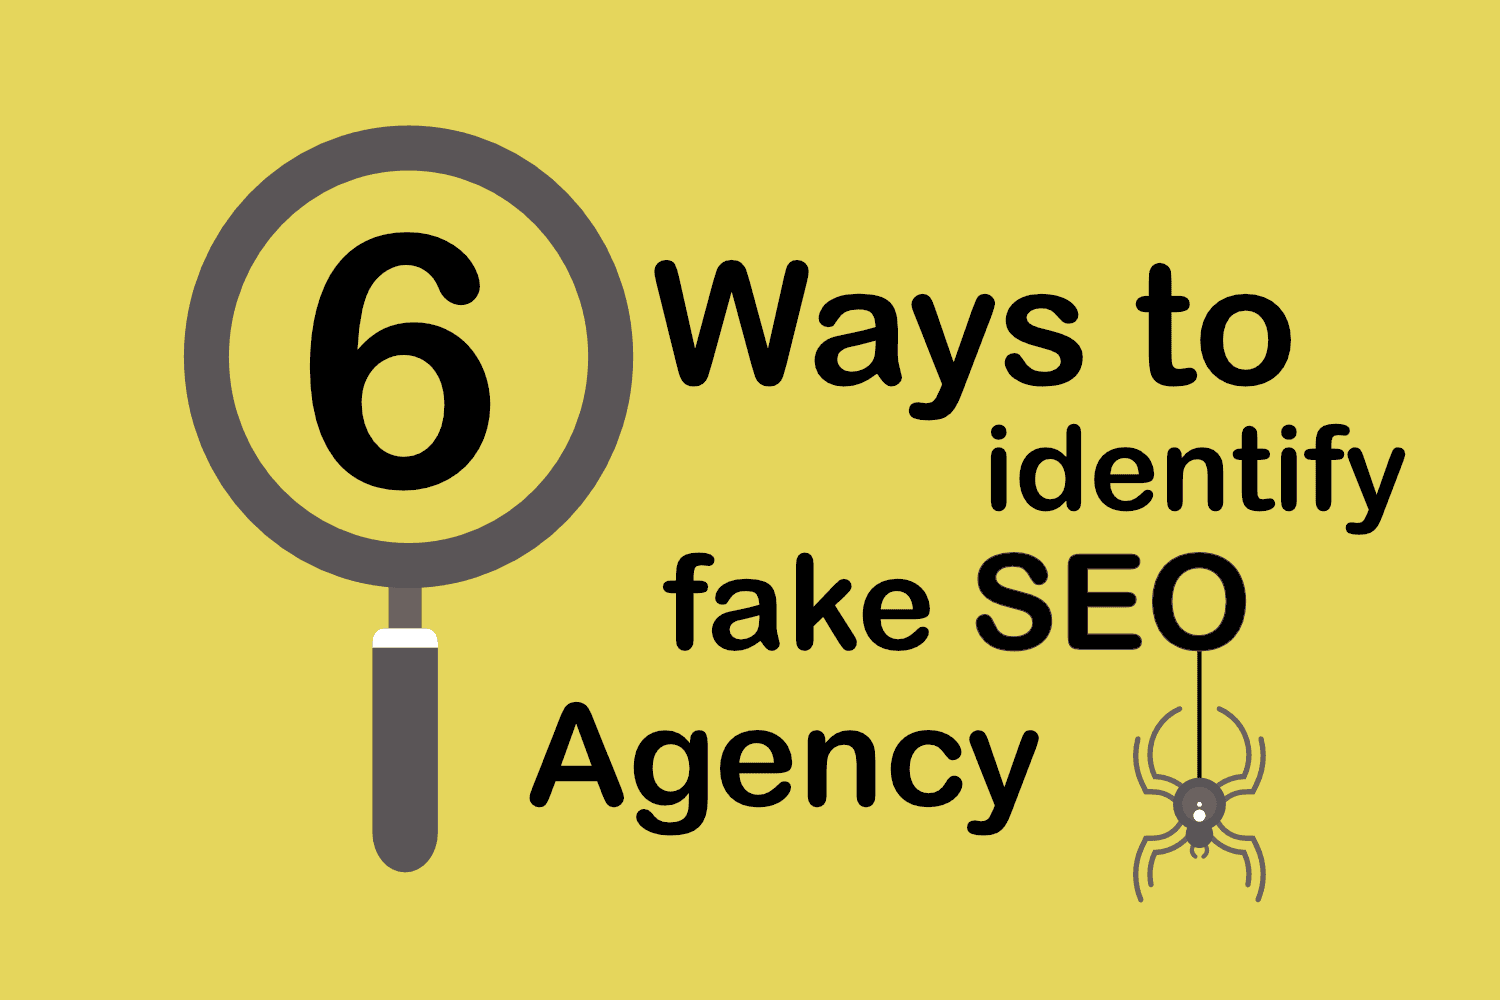 6 Ways to Identify & Detect Fake SEO Agency/Consultant